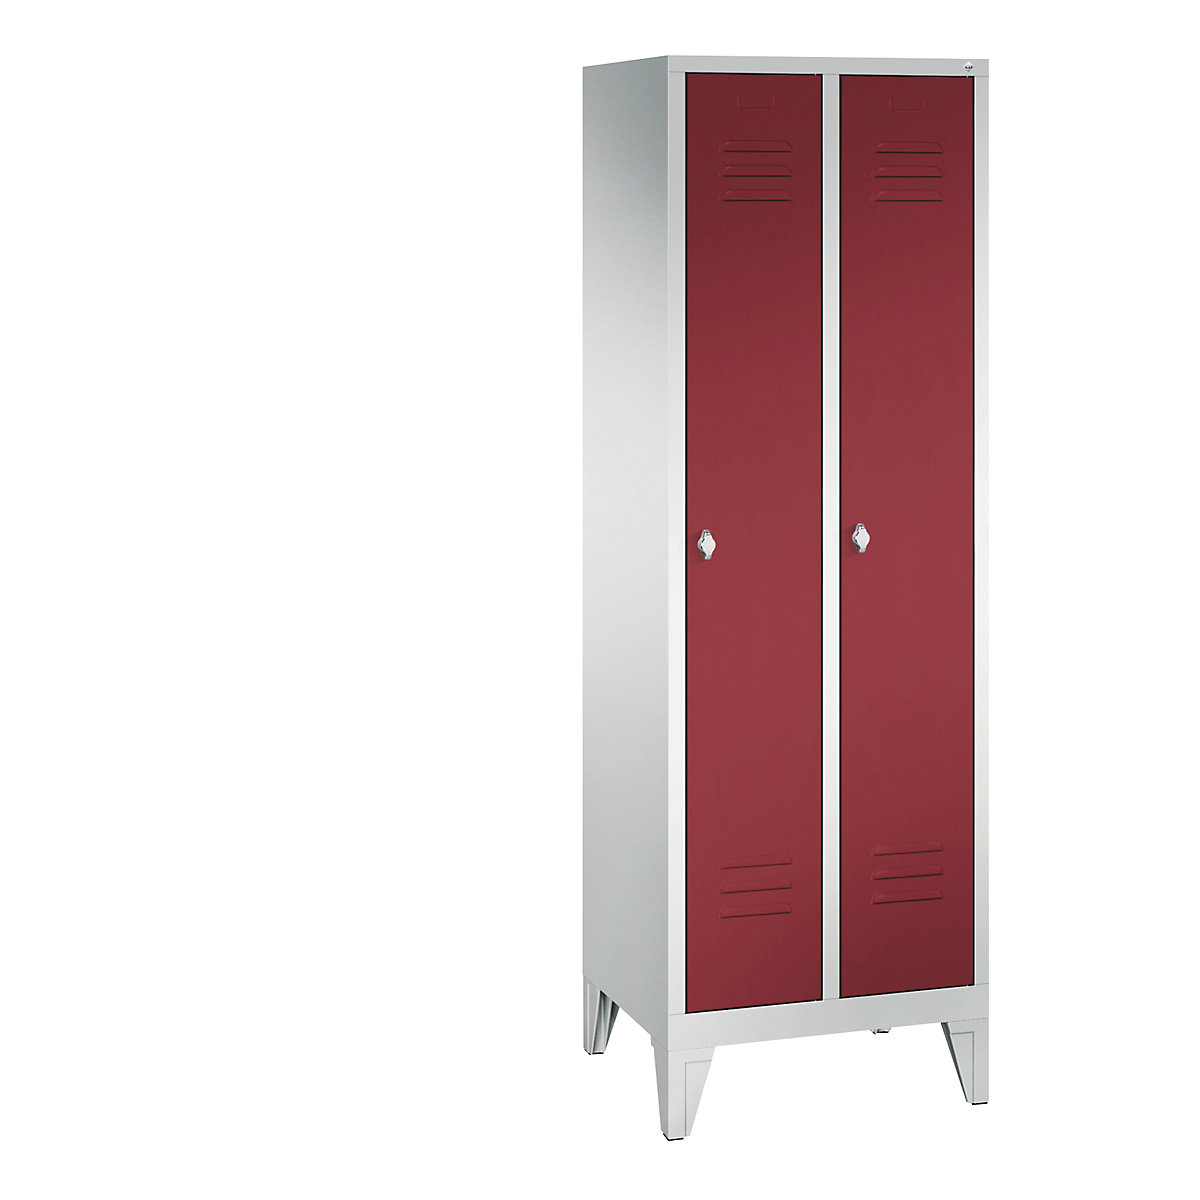 CLASSIC cloakroom locker with feet – C+P, 2 compartments, compartment width 300 mm, light grey / ruby red-8